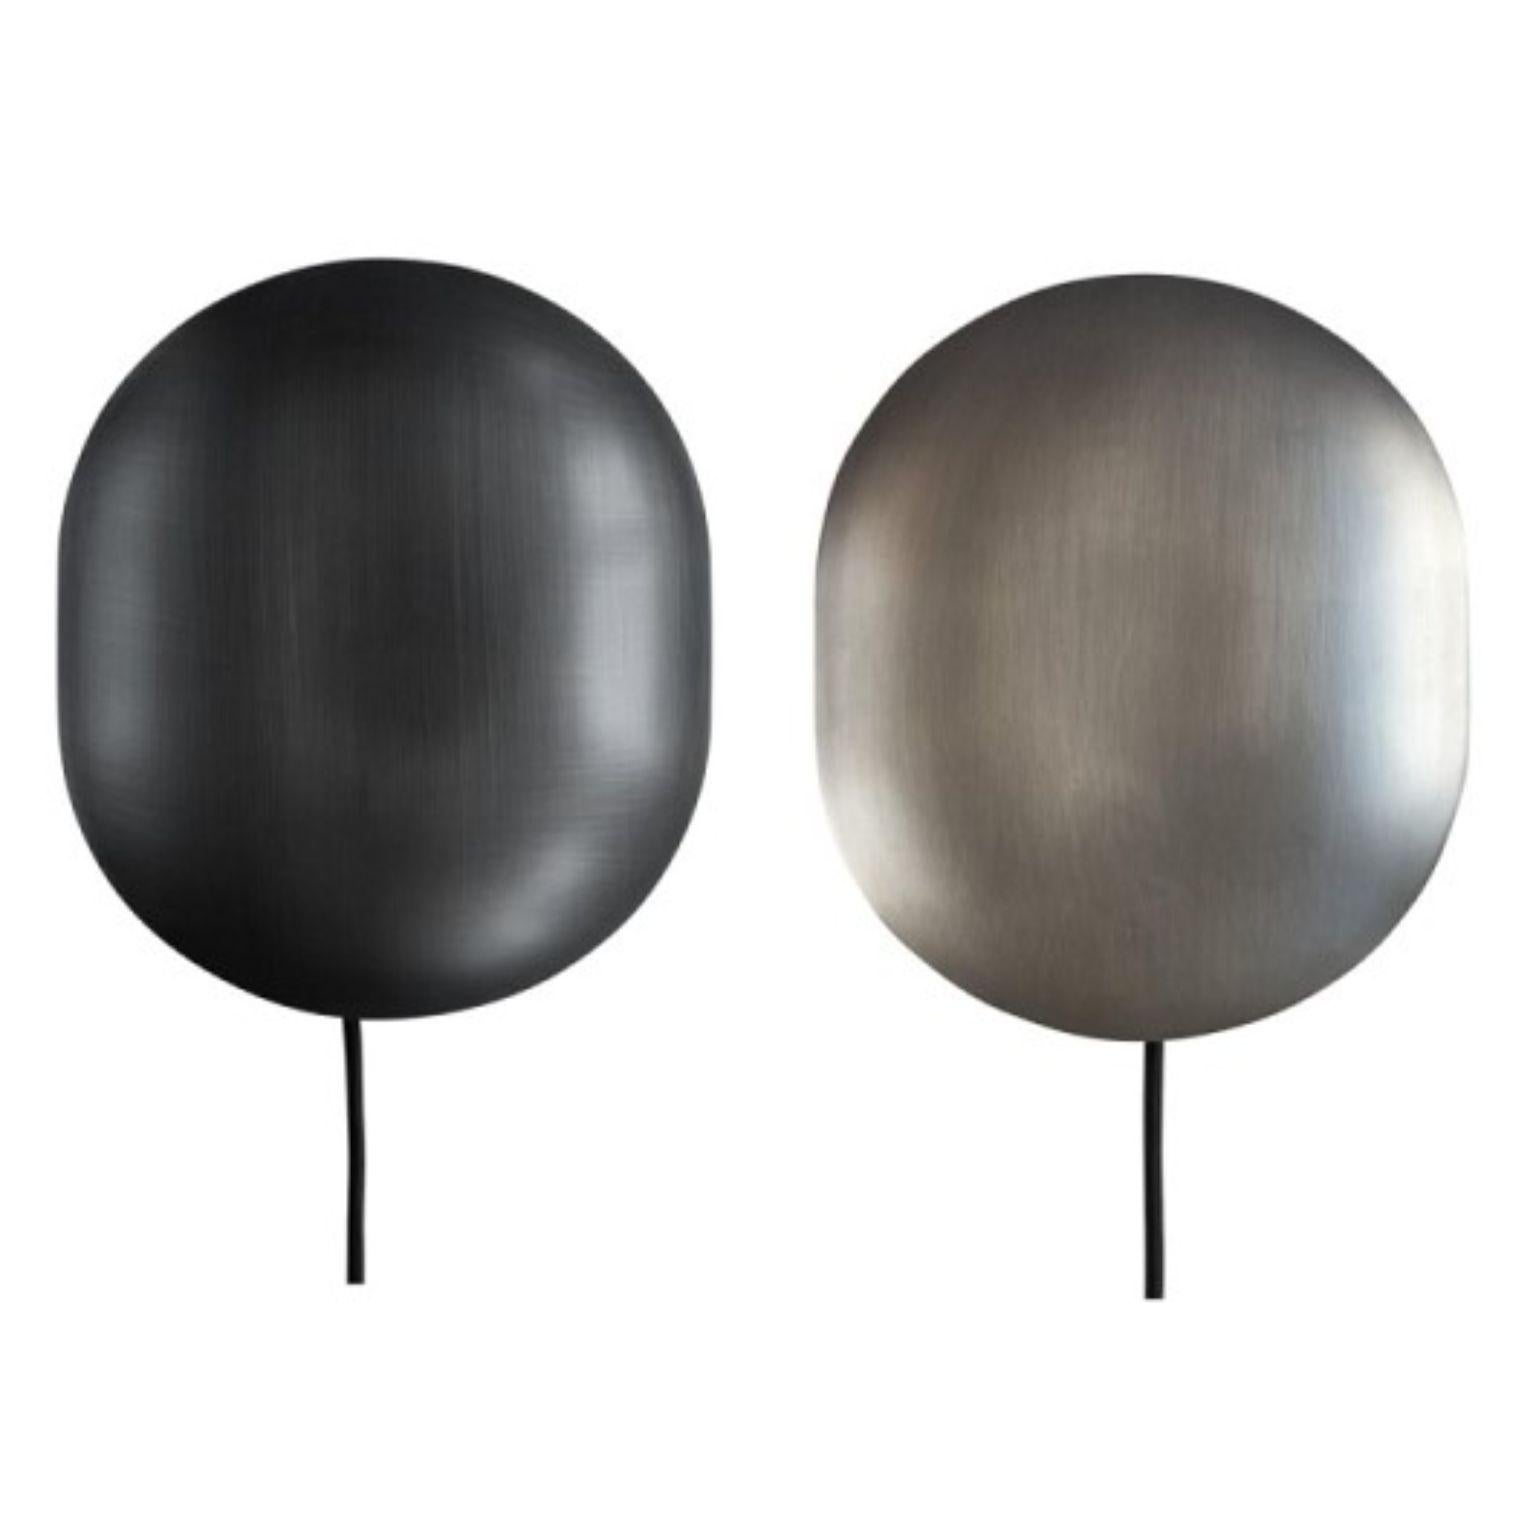 Set of 2 clam wall lamps by 101 Copenhagen
Designed by Kristian Sofus Hansen & Tommy Hyldahl
Dimensions: L 14 x W 22 x H 26 cm
Cable length: 170 cm
This product is not wired for USA
Materials: metal: plated metal / zink
Cable: fabric covered cable /